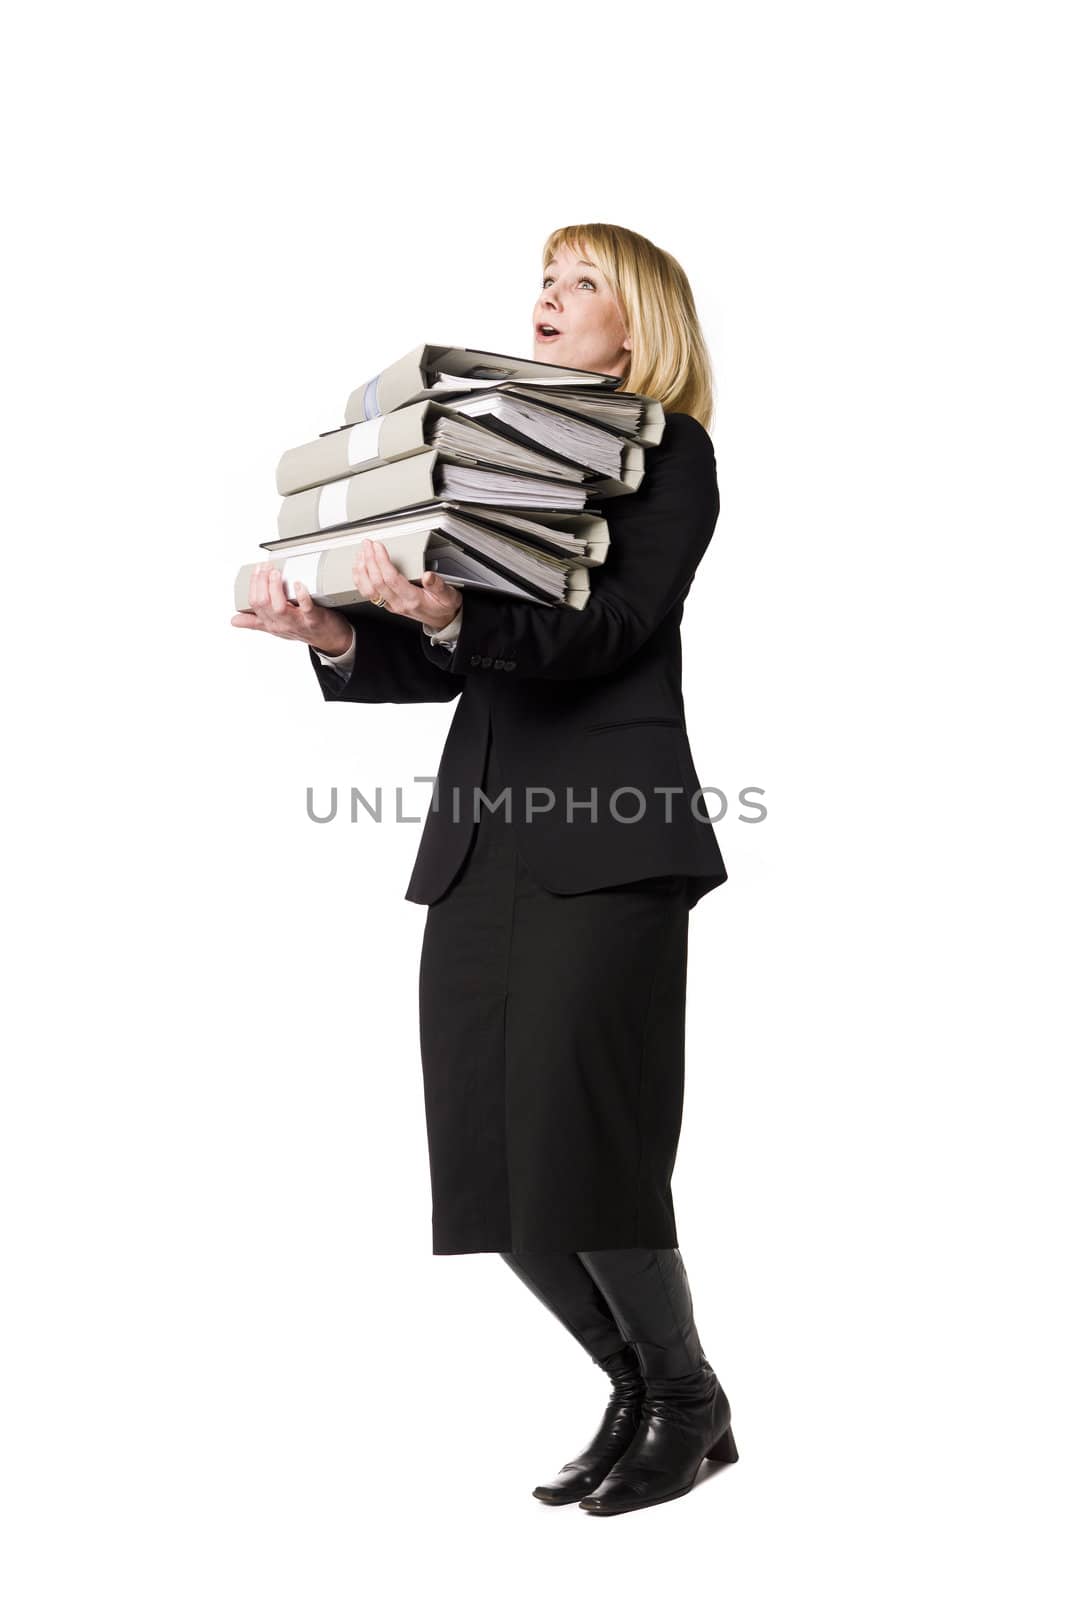 Woman overloaded with work by gemenacom